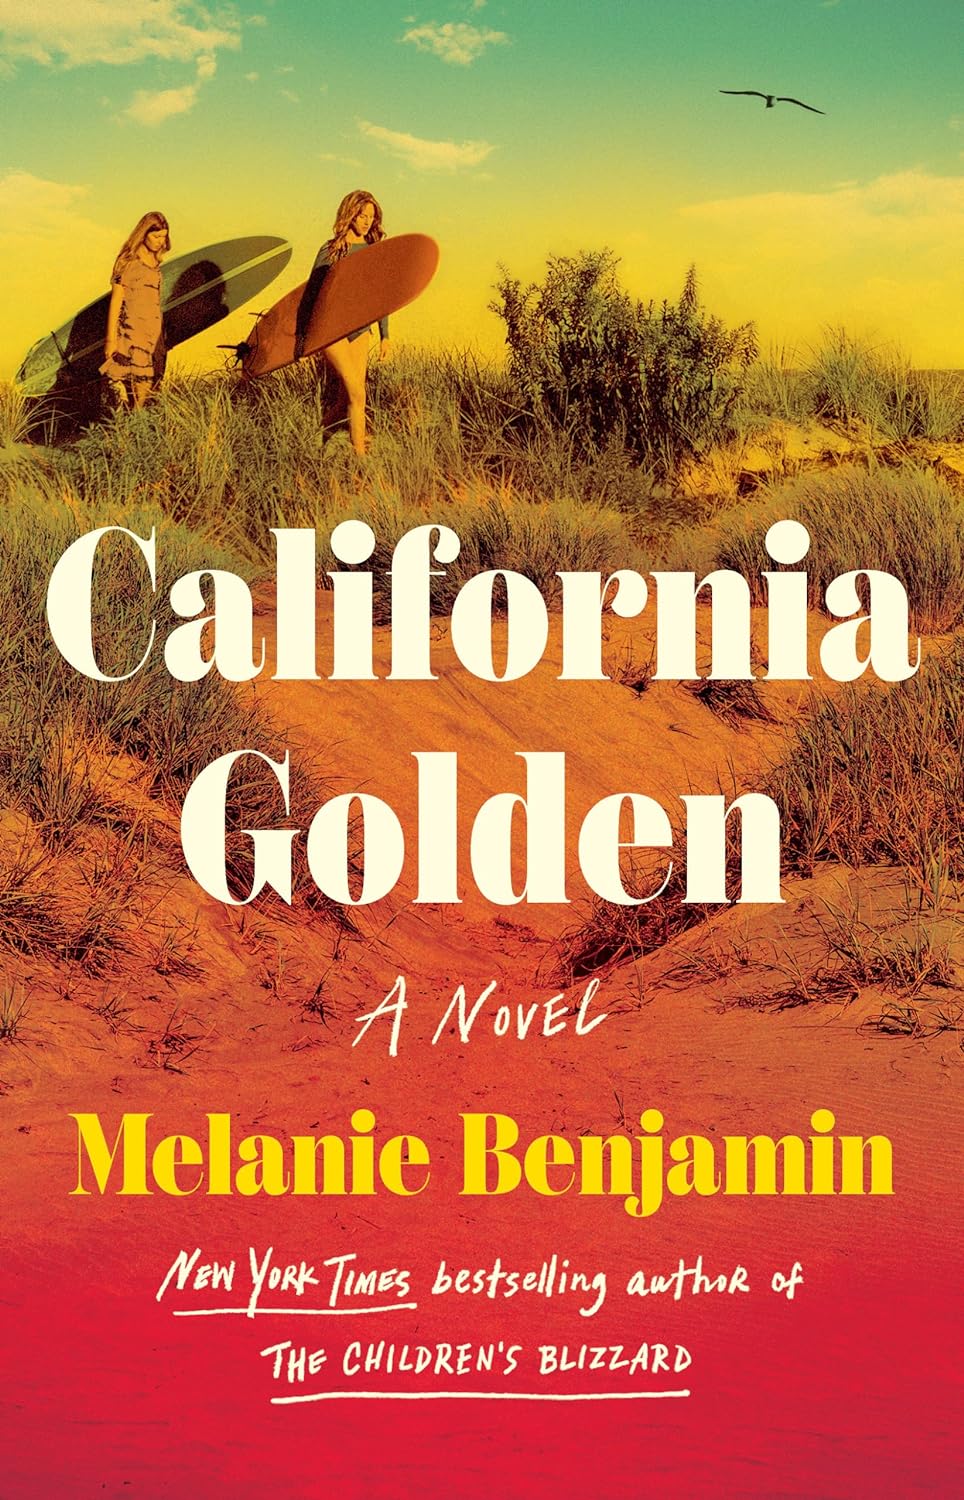 Cover of ‘California Golden’ by Melanie Benjamin. The upper left corner features two young white women carrying surfboards on a sandy beach surrounded by tall grasses. Bold white letters spell out the title ‘California Golden’ just below them, while the author’s name, Melanie Benjamin, appears in bright yellow text beneath the title. The background has a golden glow, creating a vintage ambiance. 